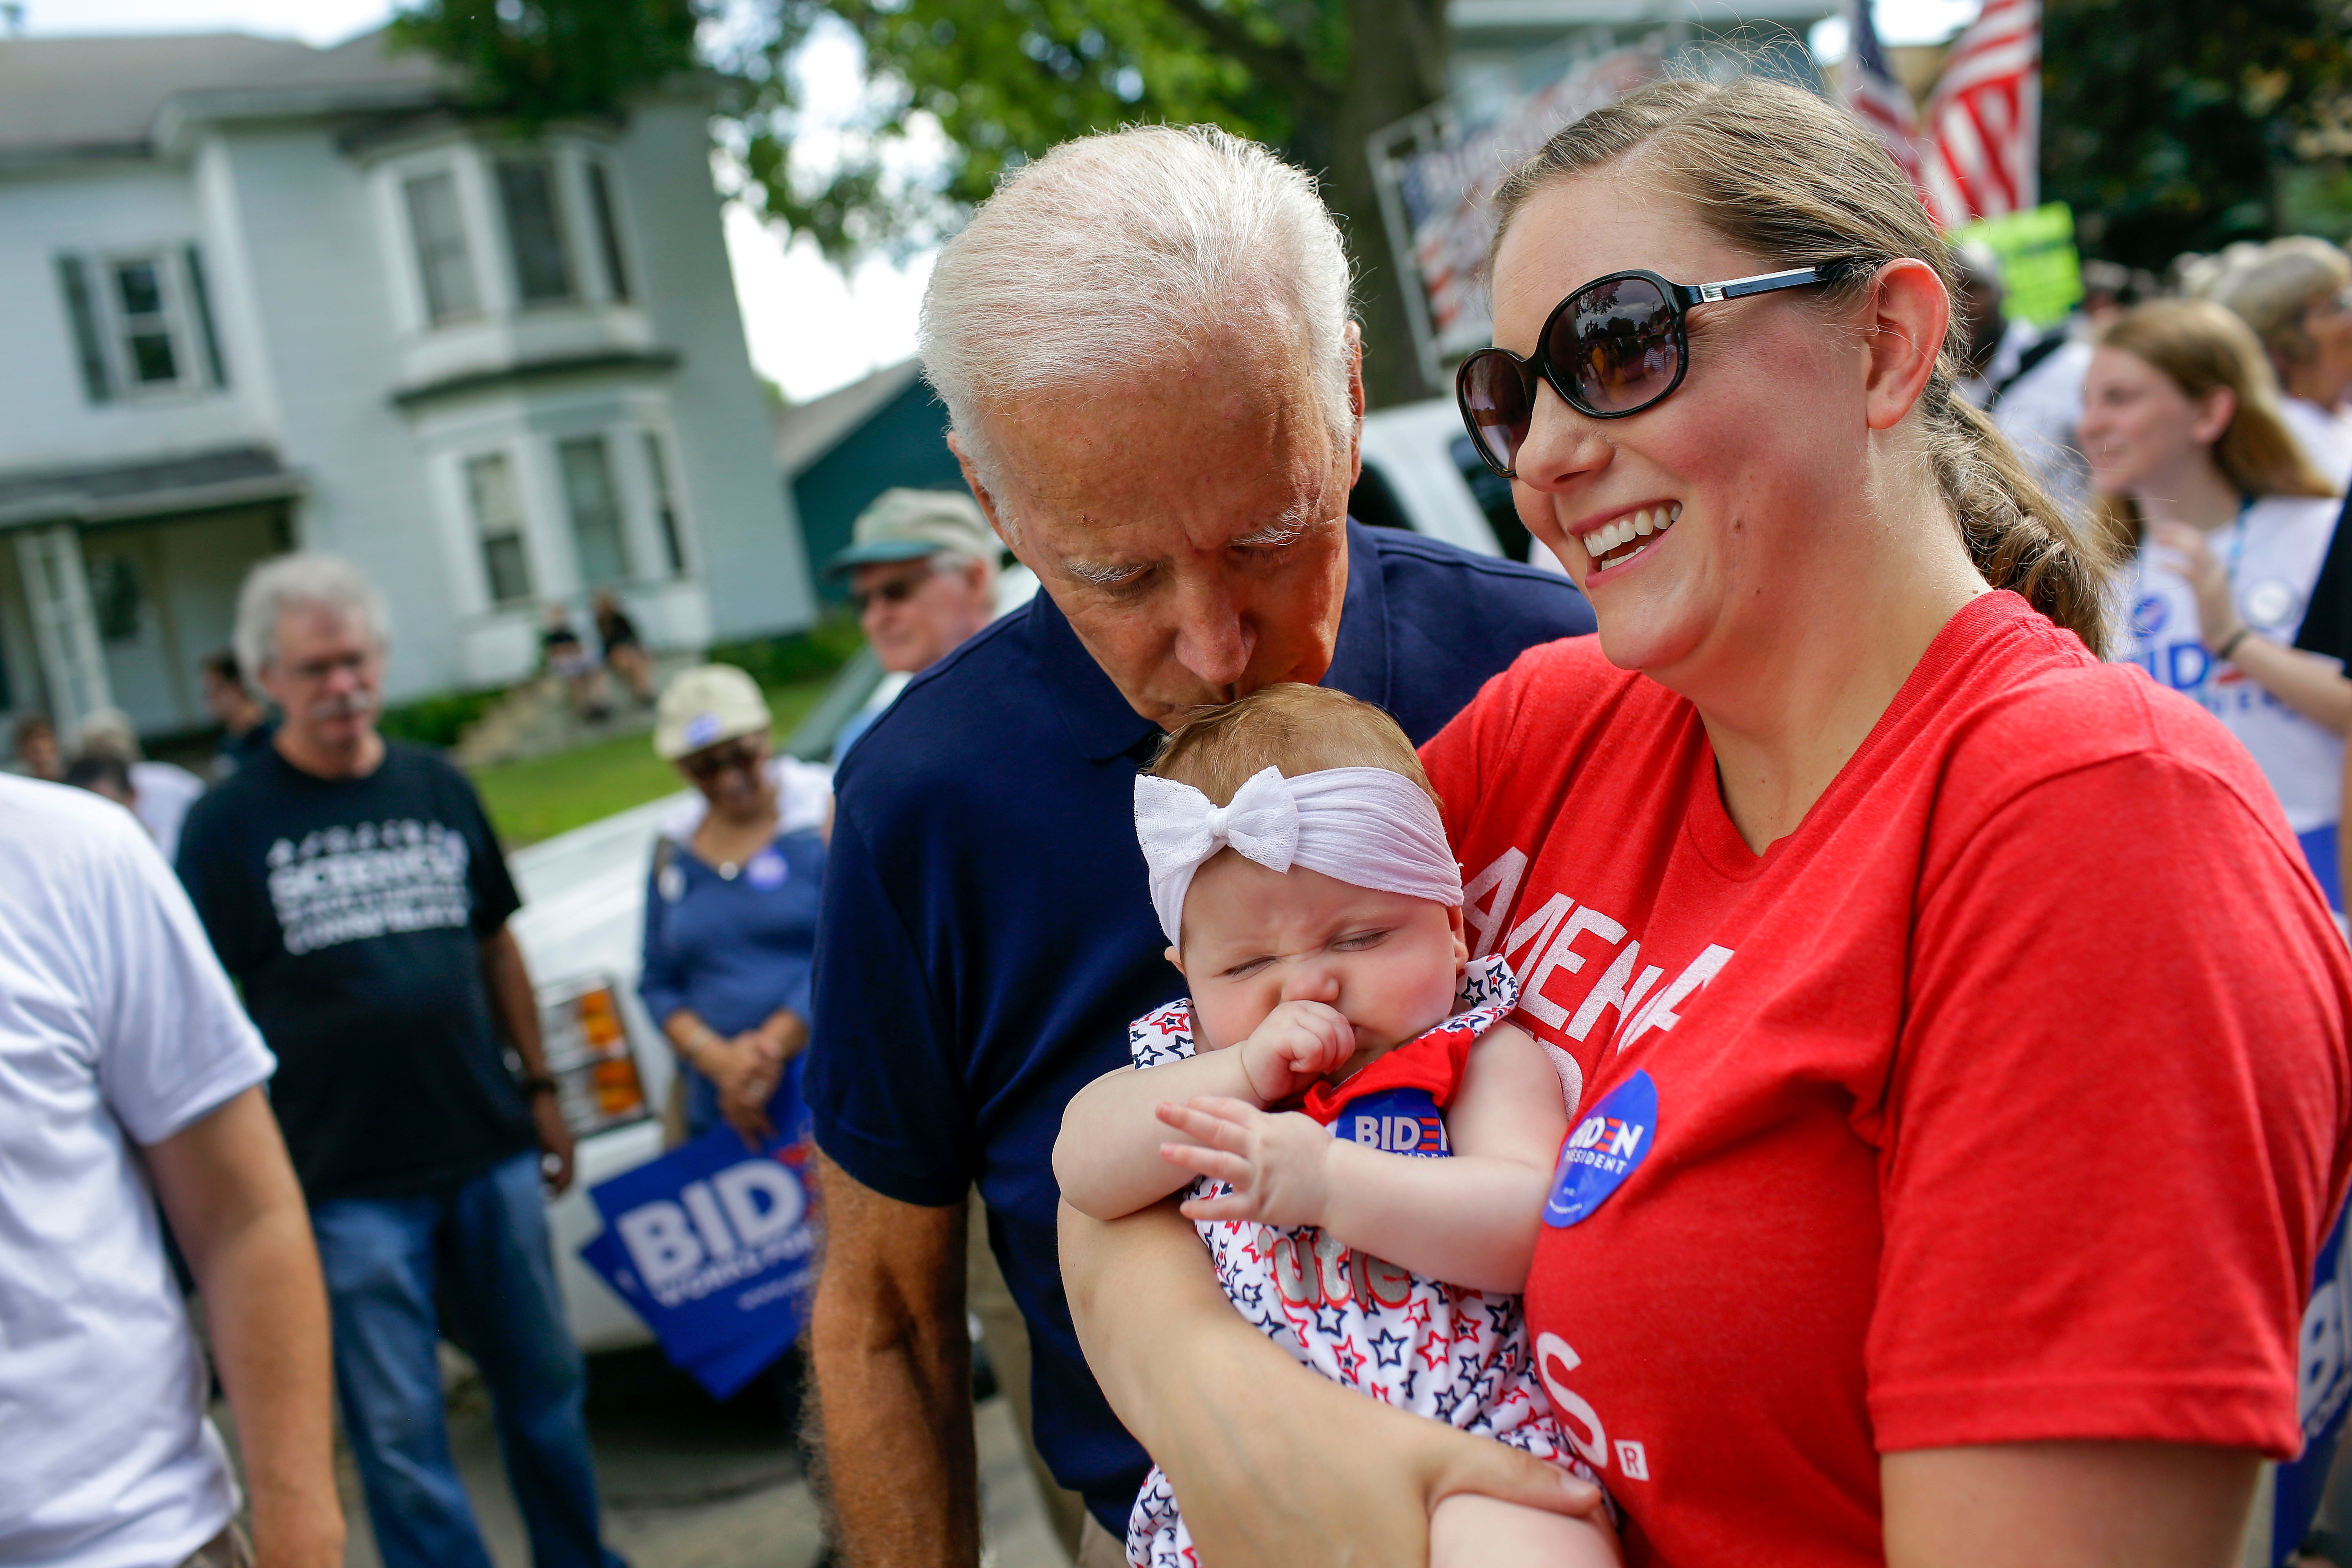 Democratic presidential candidate, former Vice President Joe Biden kisses Ashley Blasberg on her head as her mother Erin Blasberg looks on during the Fourth of July parade on July 4, 2019 in Independence, Iowa. (Photo by Joshua Lott/Getty Images)